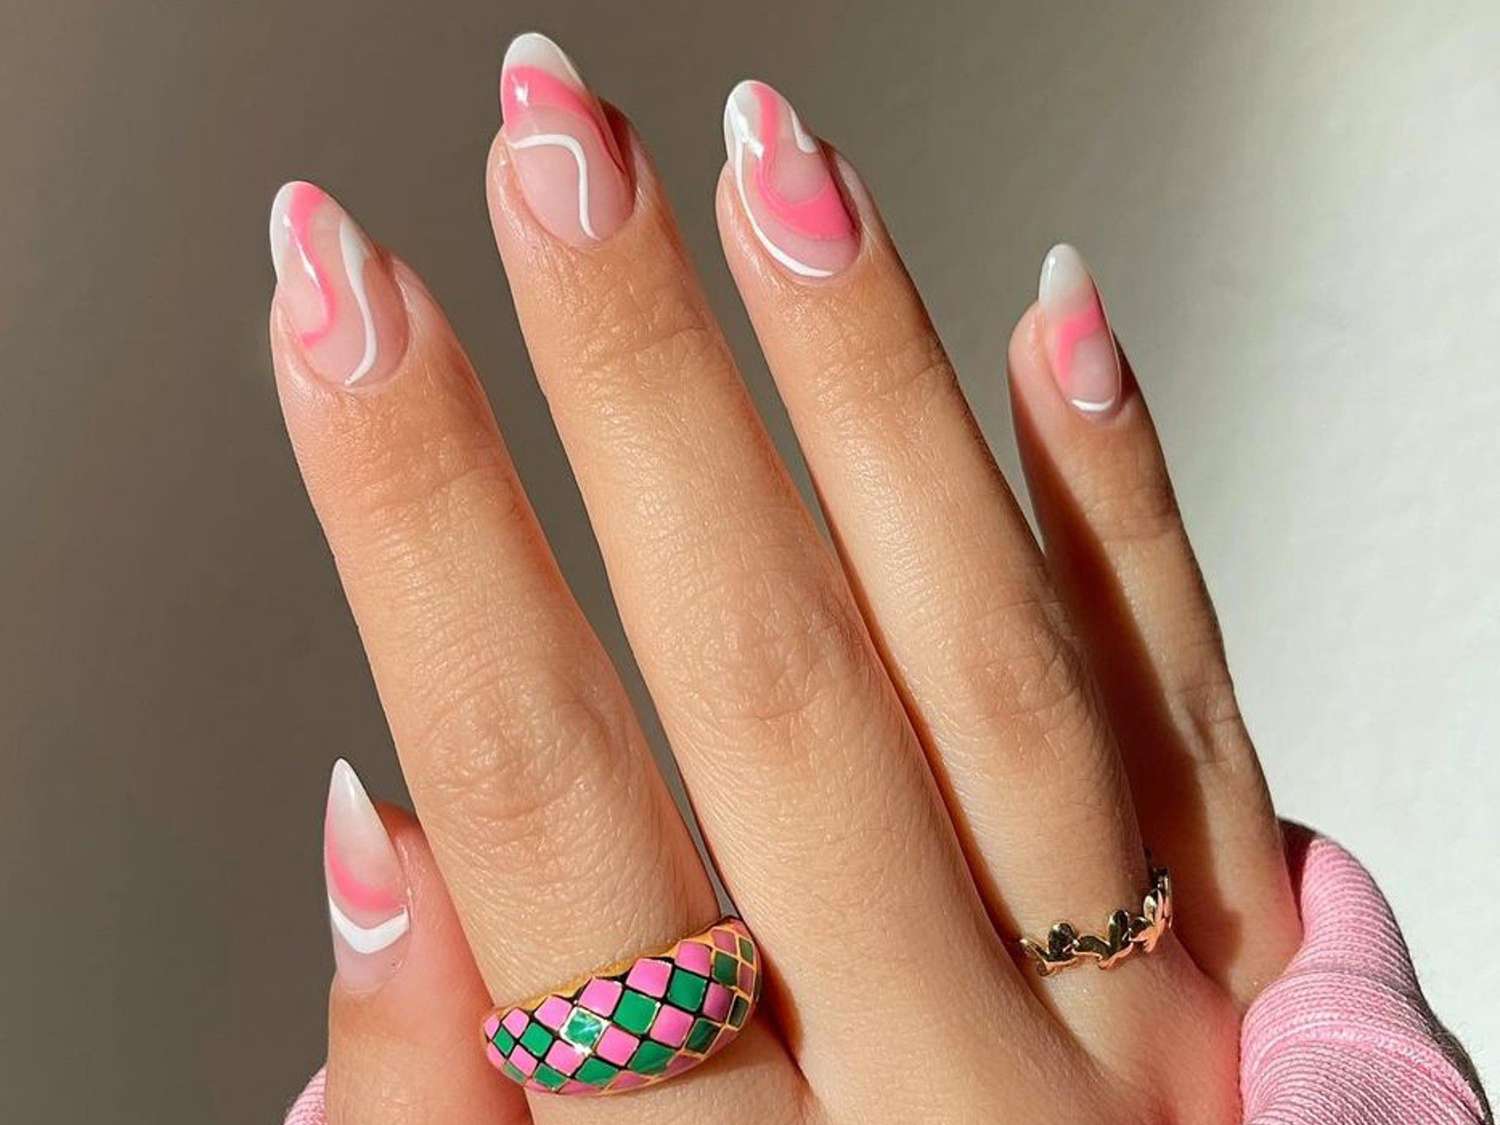 How To: At-home Manicure